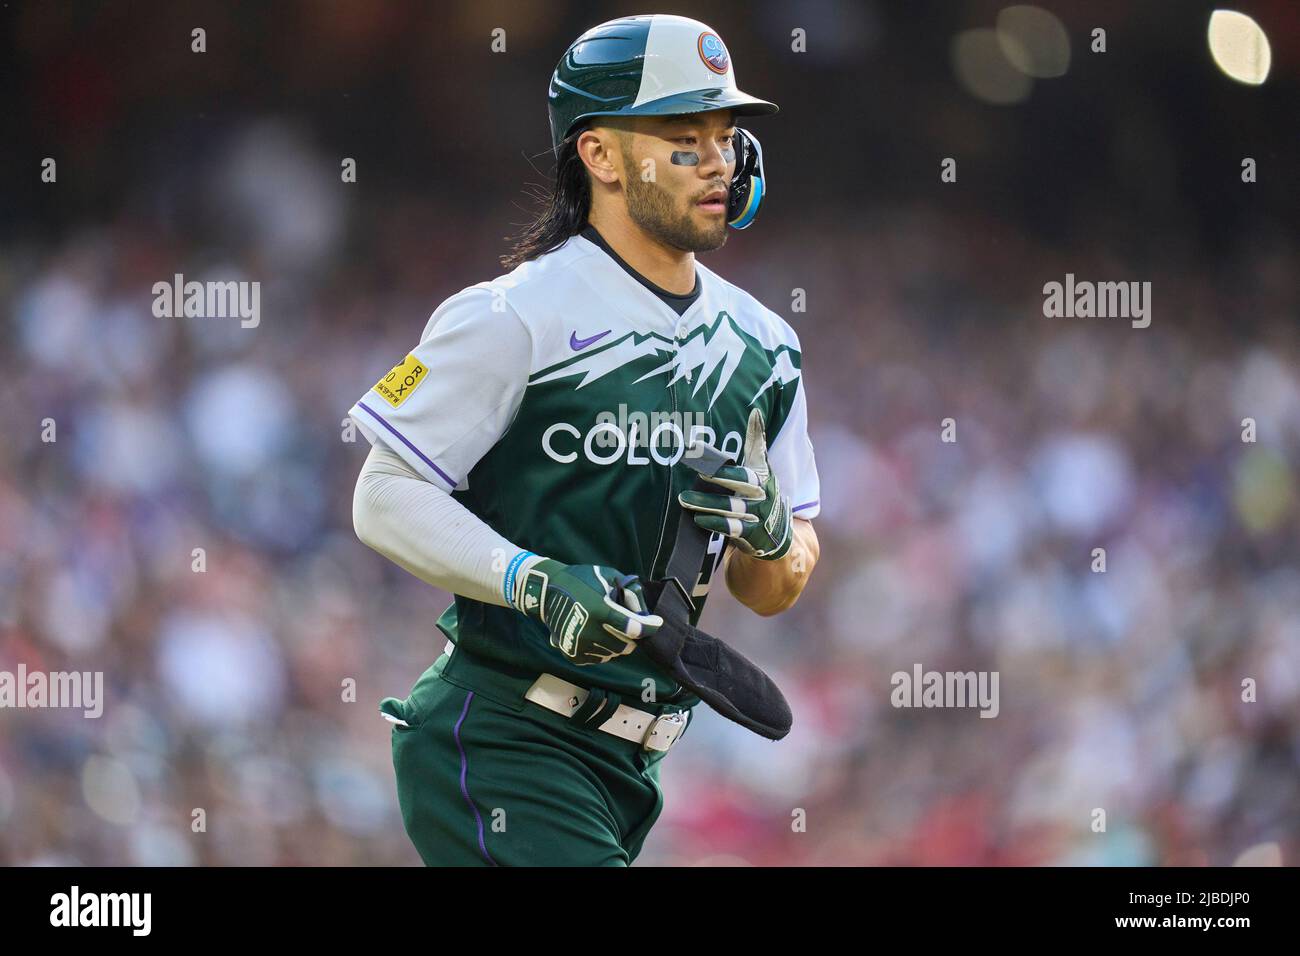 Denver CO, USA. 4th June, 2022. Colorado outfielder Conner Joe (9) takes a  walk during the game with Atlanta Braves and Colorado Rockies held at Coors  Field in Denver Co. David Seelig/Cal